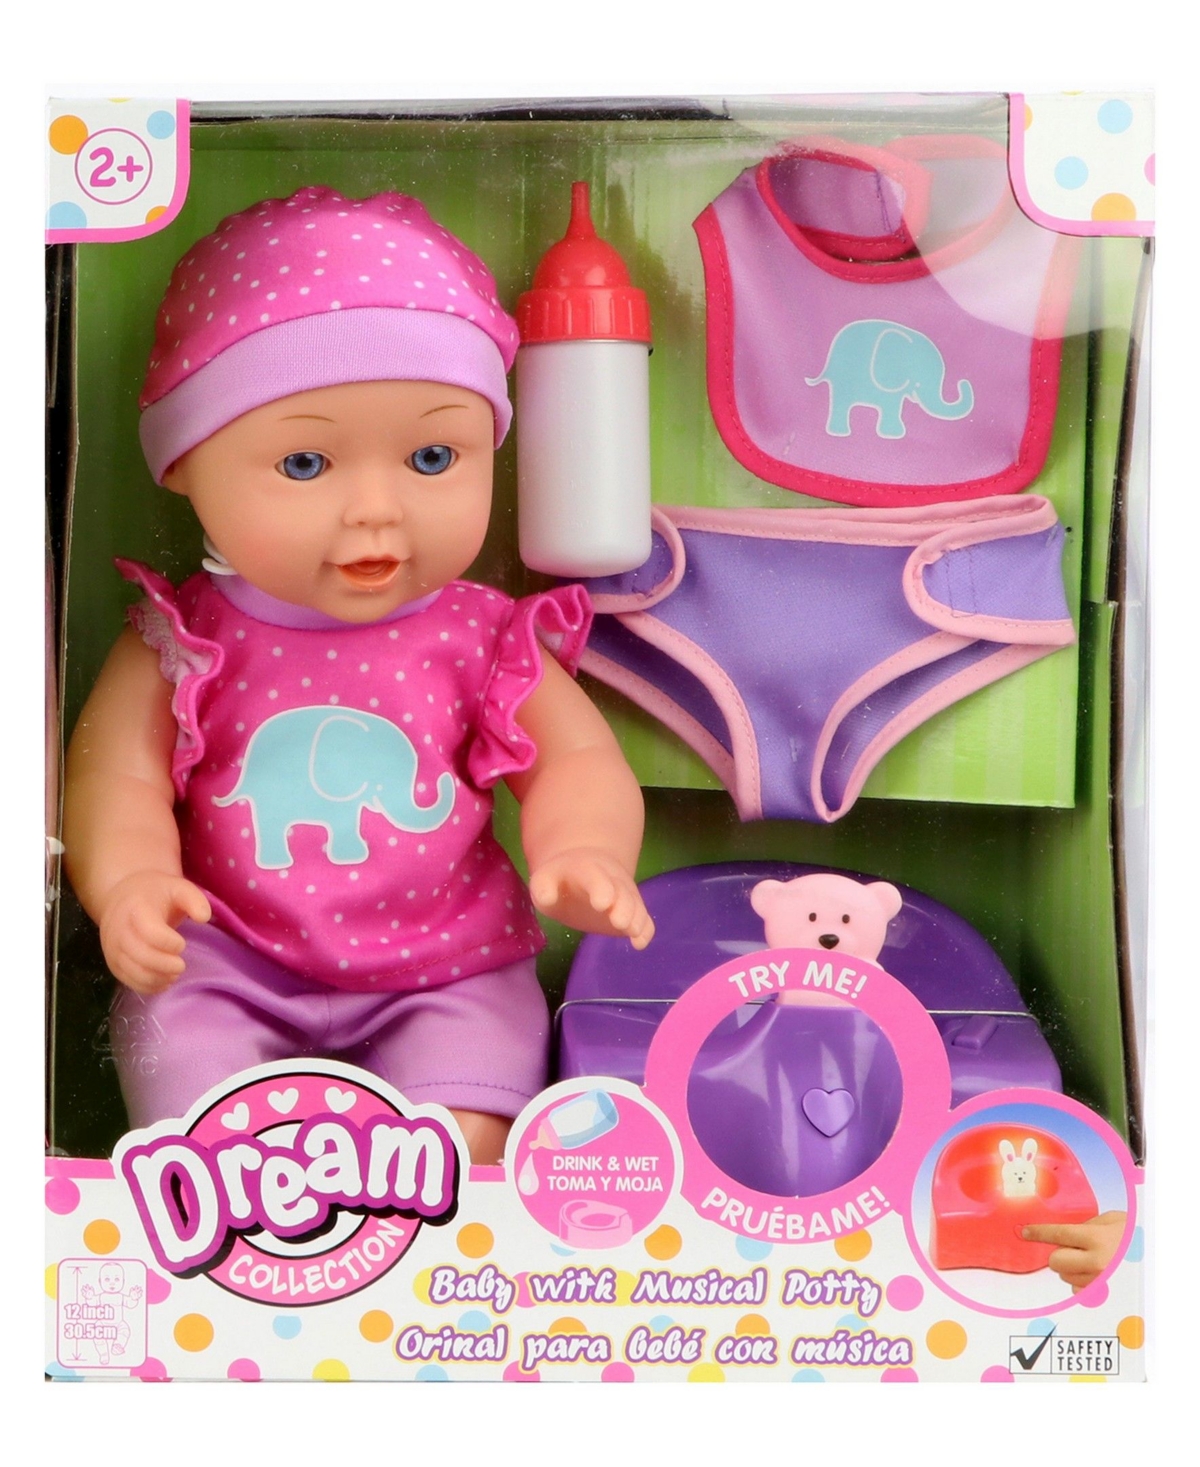 Redbox Dream Collection 12" Baby Doll With Musical Potty In Multi